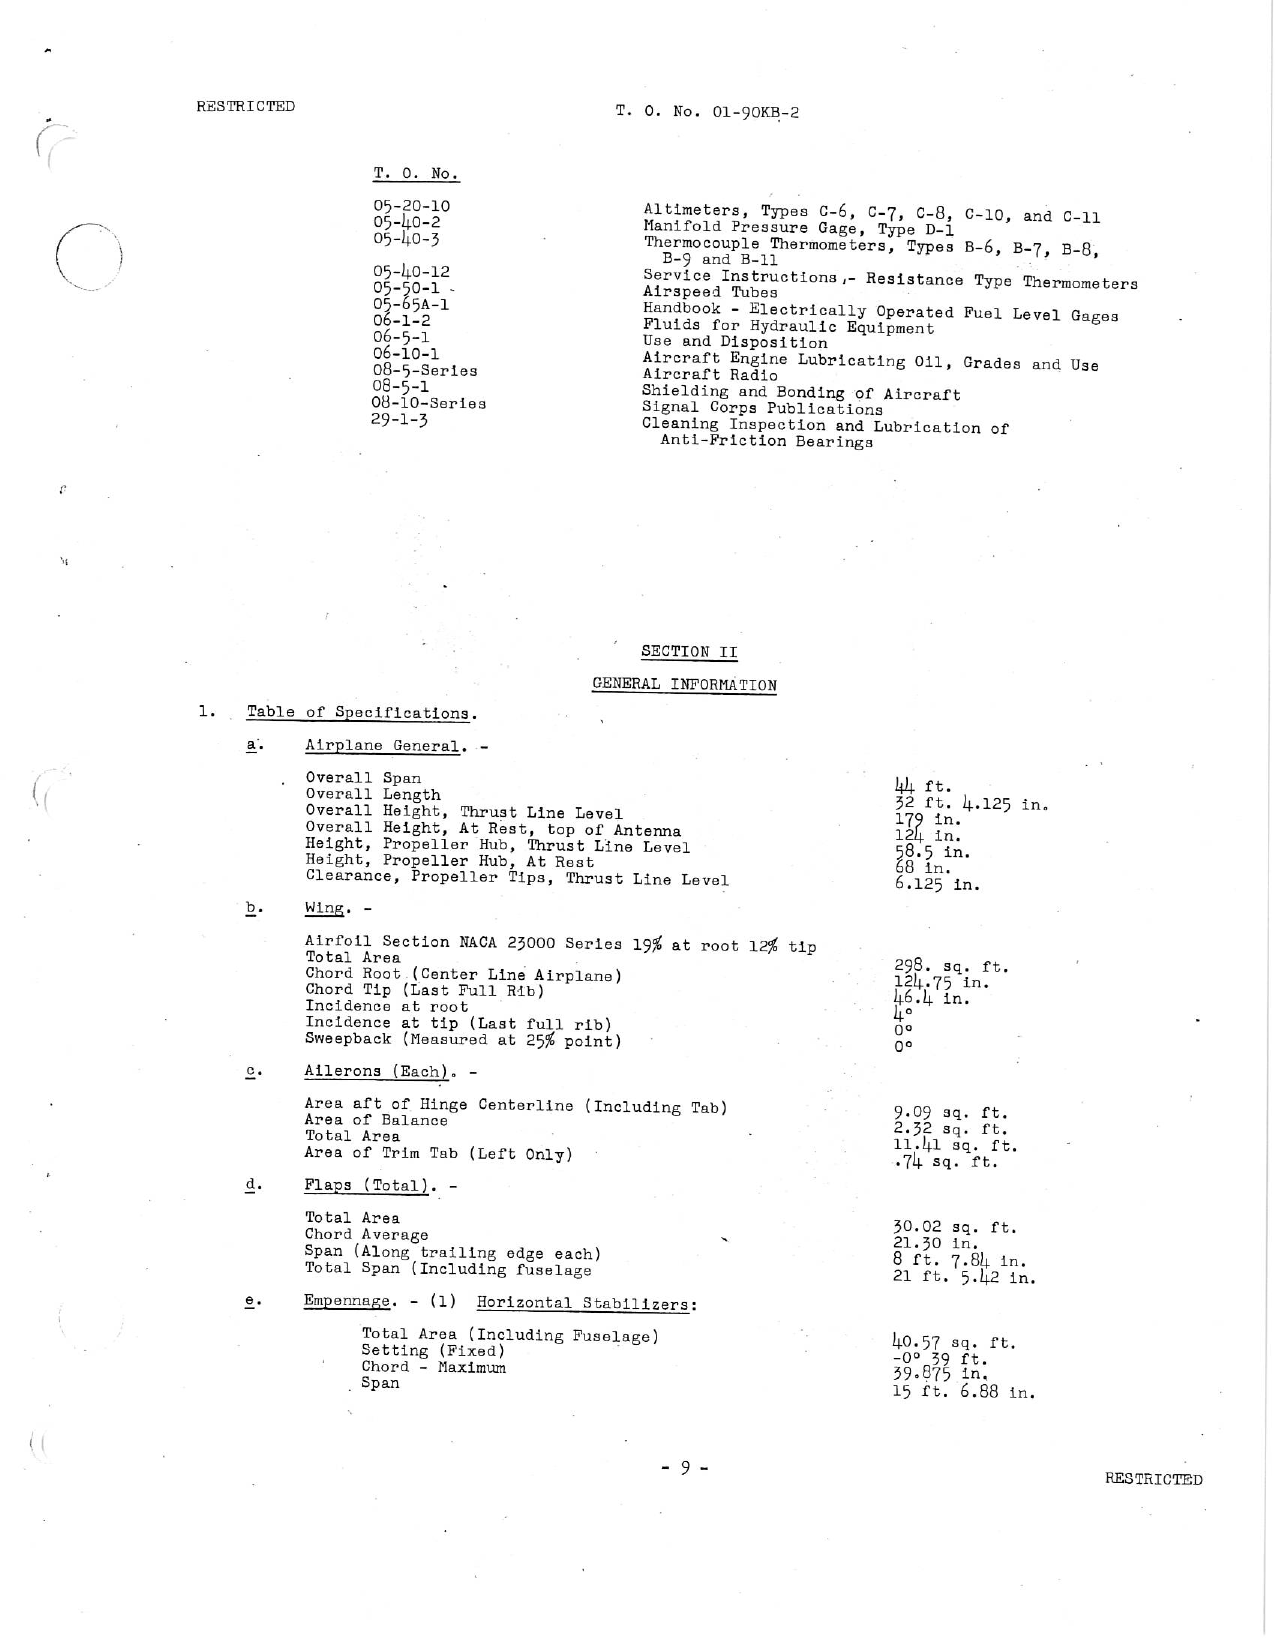 Sample page 11 from AirCorps Library document: Preliminary Handbook of Service Instructions: AT-10